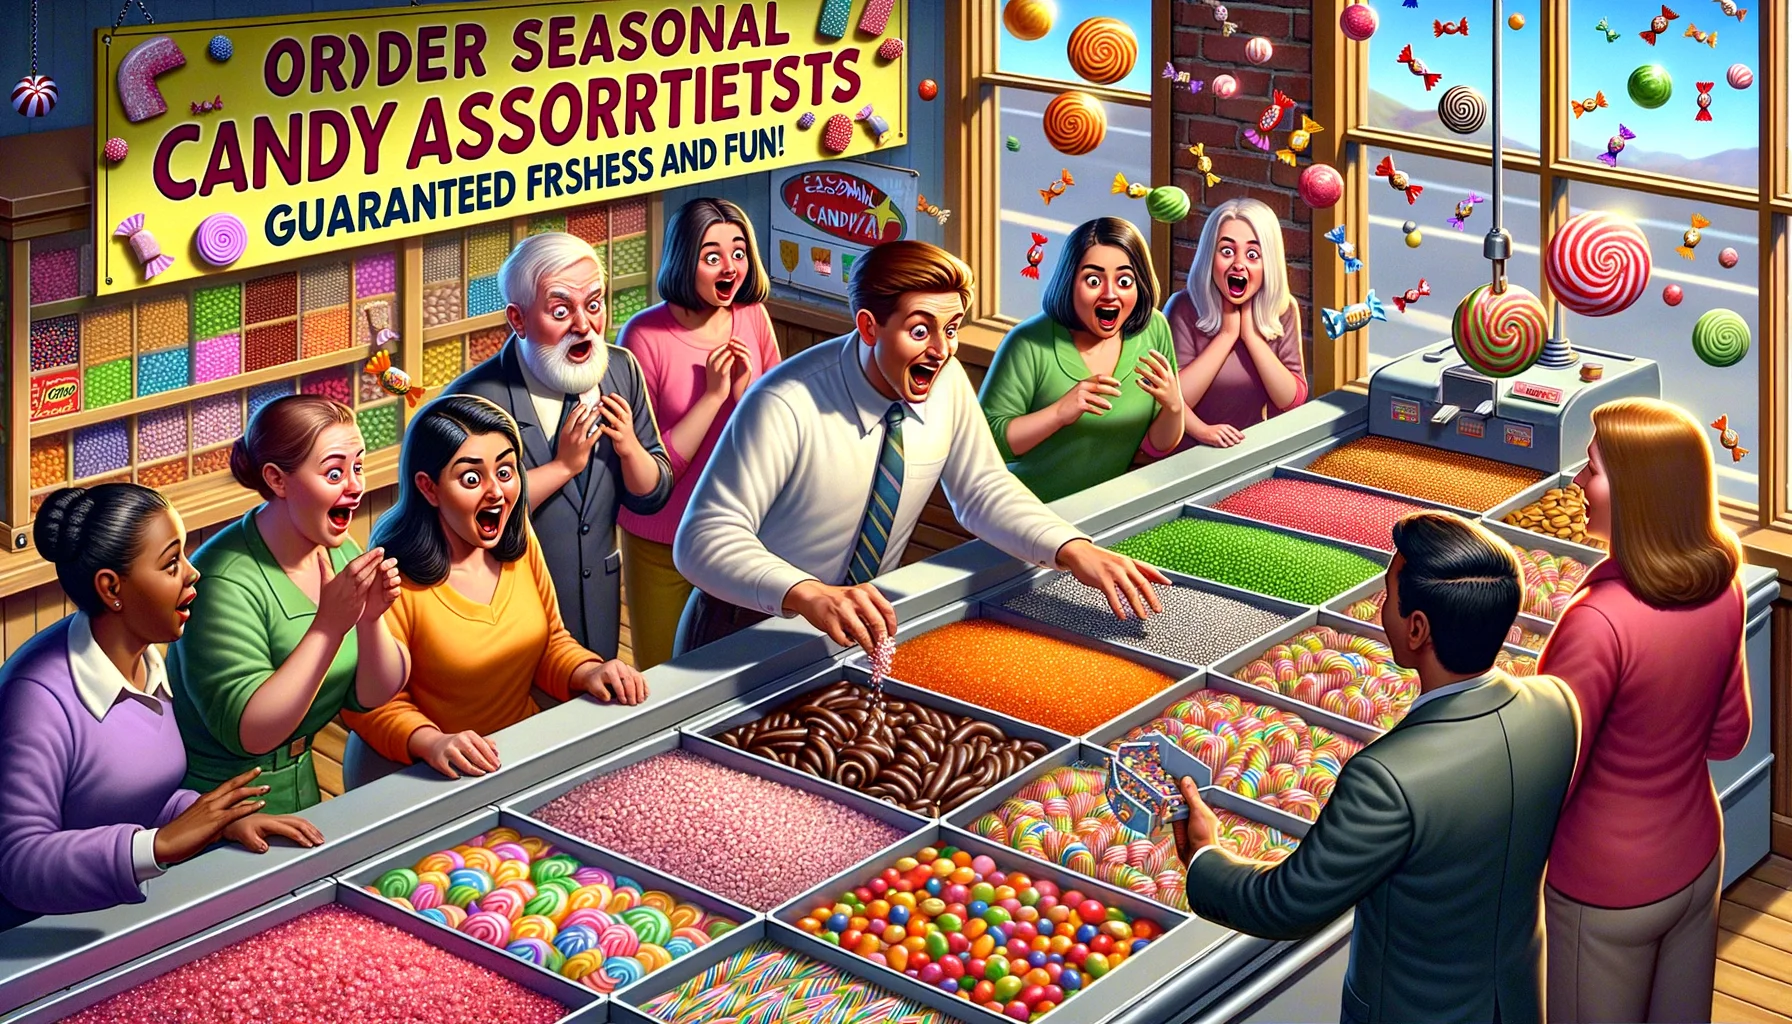 Create a humorous, realistic scene where a variety of seasonal candies is being ordered in the perfect scenario. A candy shop is displaying them in an attractive and colourful way. A group of customers are there, each with their own distinct expressions of shock, amazement, and joy upon seeing the vast array of candies. A Caucasian male shopkeeper is enthusiastically explaining the different types of candies to a South Asian female customer. There are also candies falling from a conveyor belt as though it's raining candies. The shop sign humorously states, 'Order Seasonal Candy Assortments: Guaranteed Freshness and Fun!'